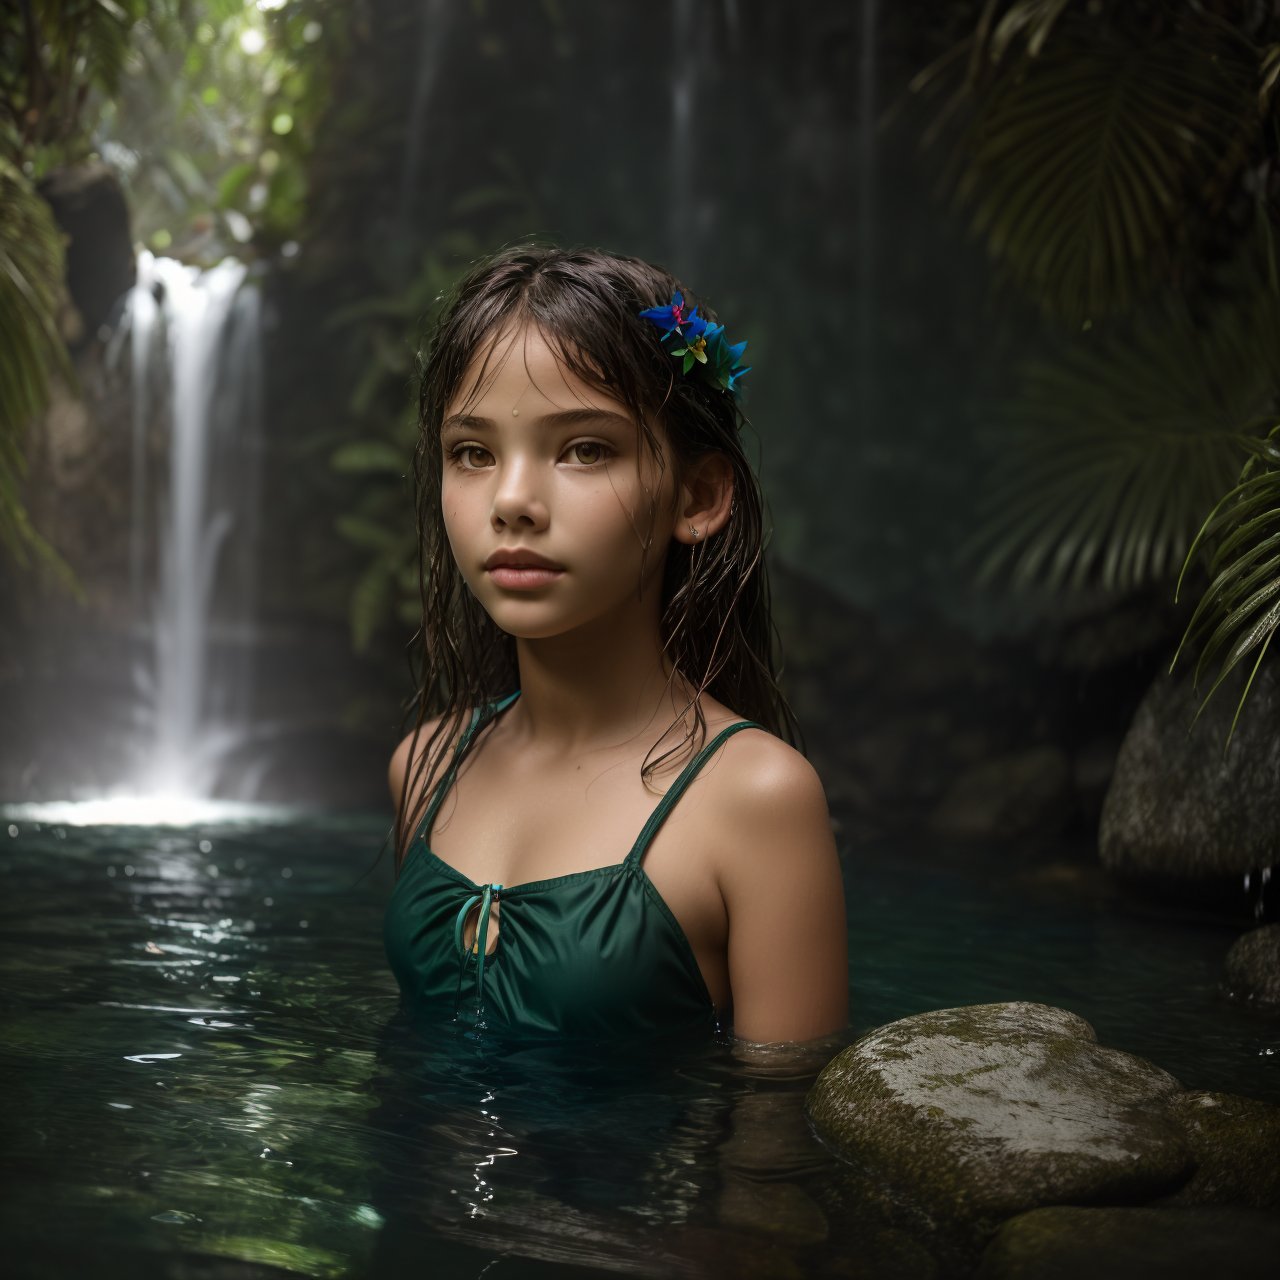 (masterpiece:1.3), view from below, close up of charming (AIDA_LoRA_LG2014:1.01) <lora:AIDA_LoRA_LG2014:0.76> in a dark green bathsuit sitting on the stones in a tropical garden in front of a waterfall, water, wet, sunlight, outdoors, little girl, pretty face, intimate, cinematic, studio photo, getty images, (colorful:1.1)